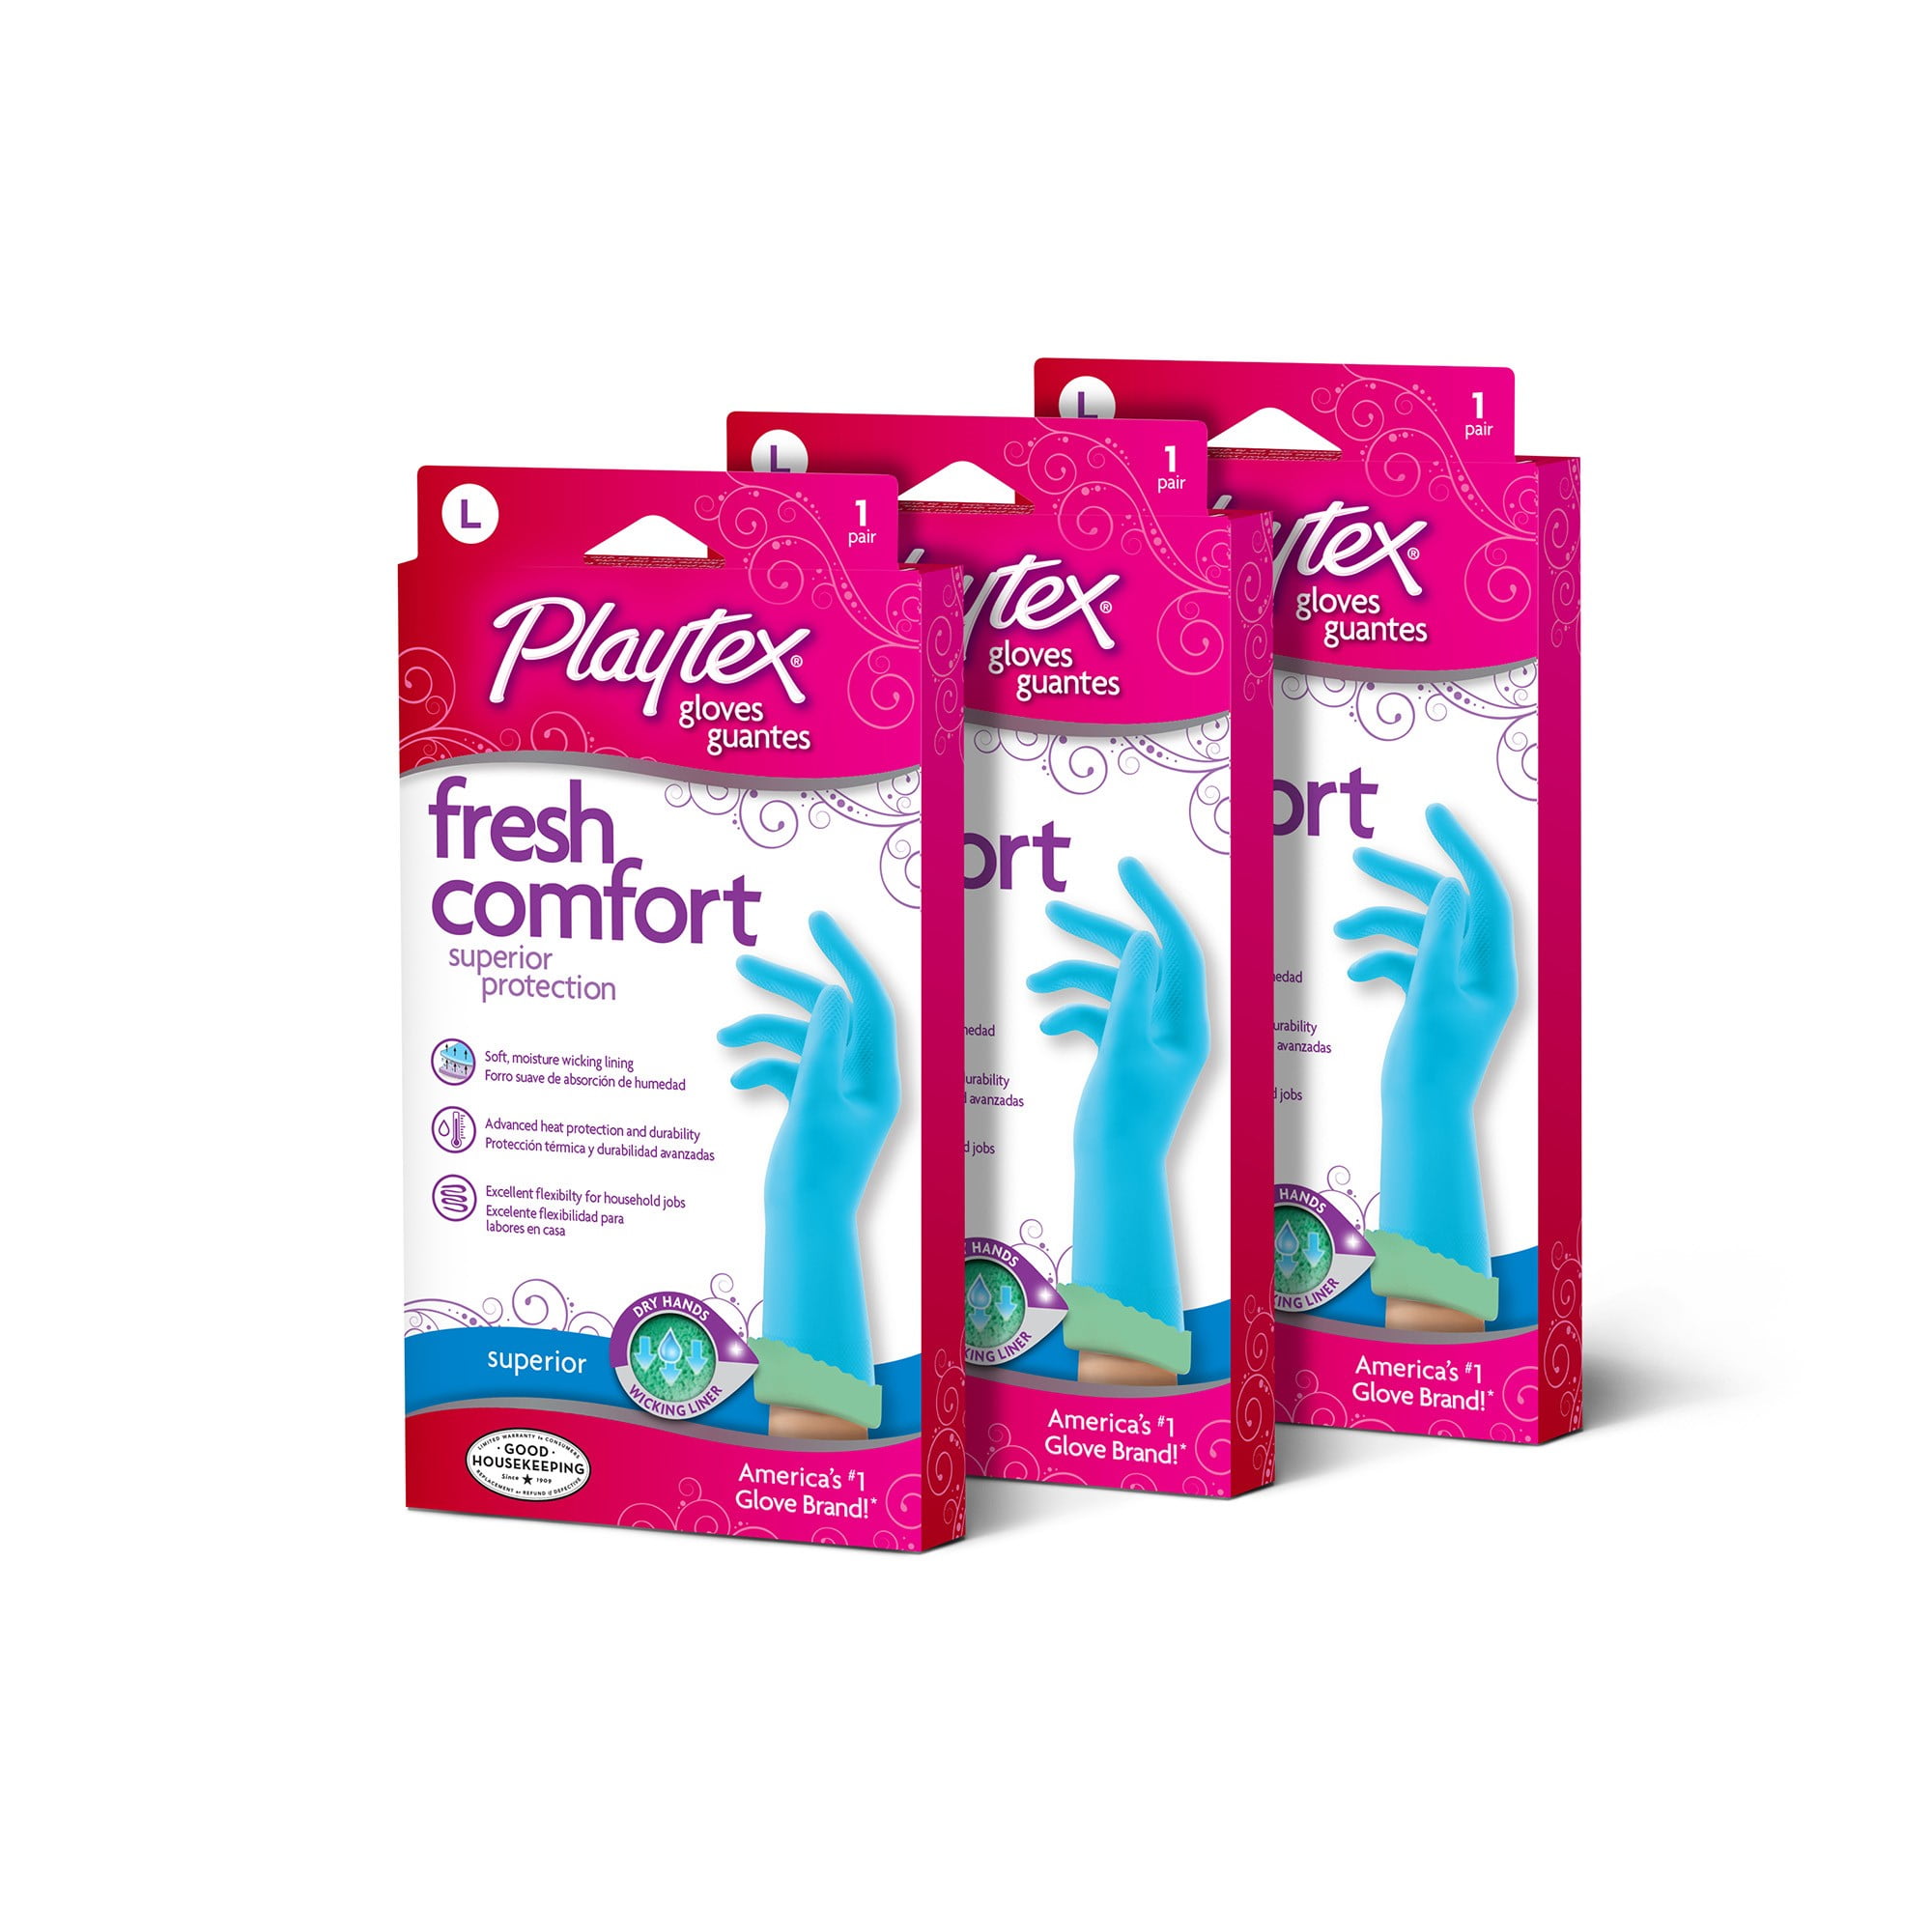 Details about   Playtex Fresh Comfort Superior Protection Blue Rubber Gloves 2 Pair Size Medium 